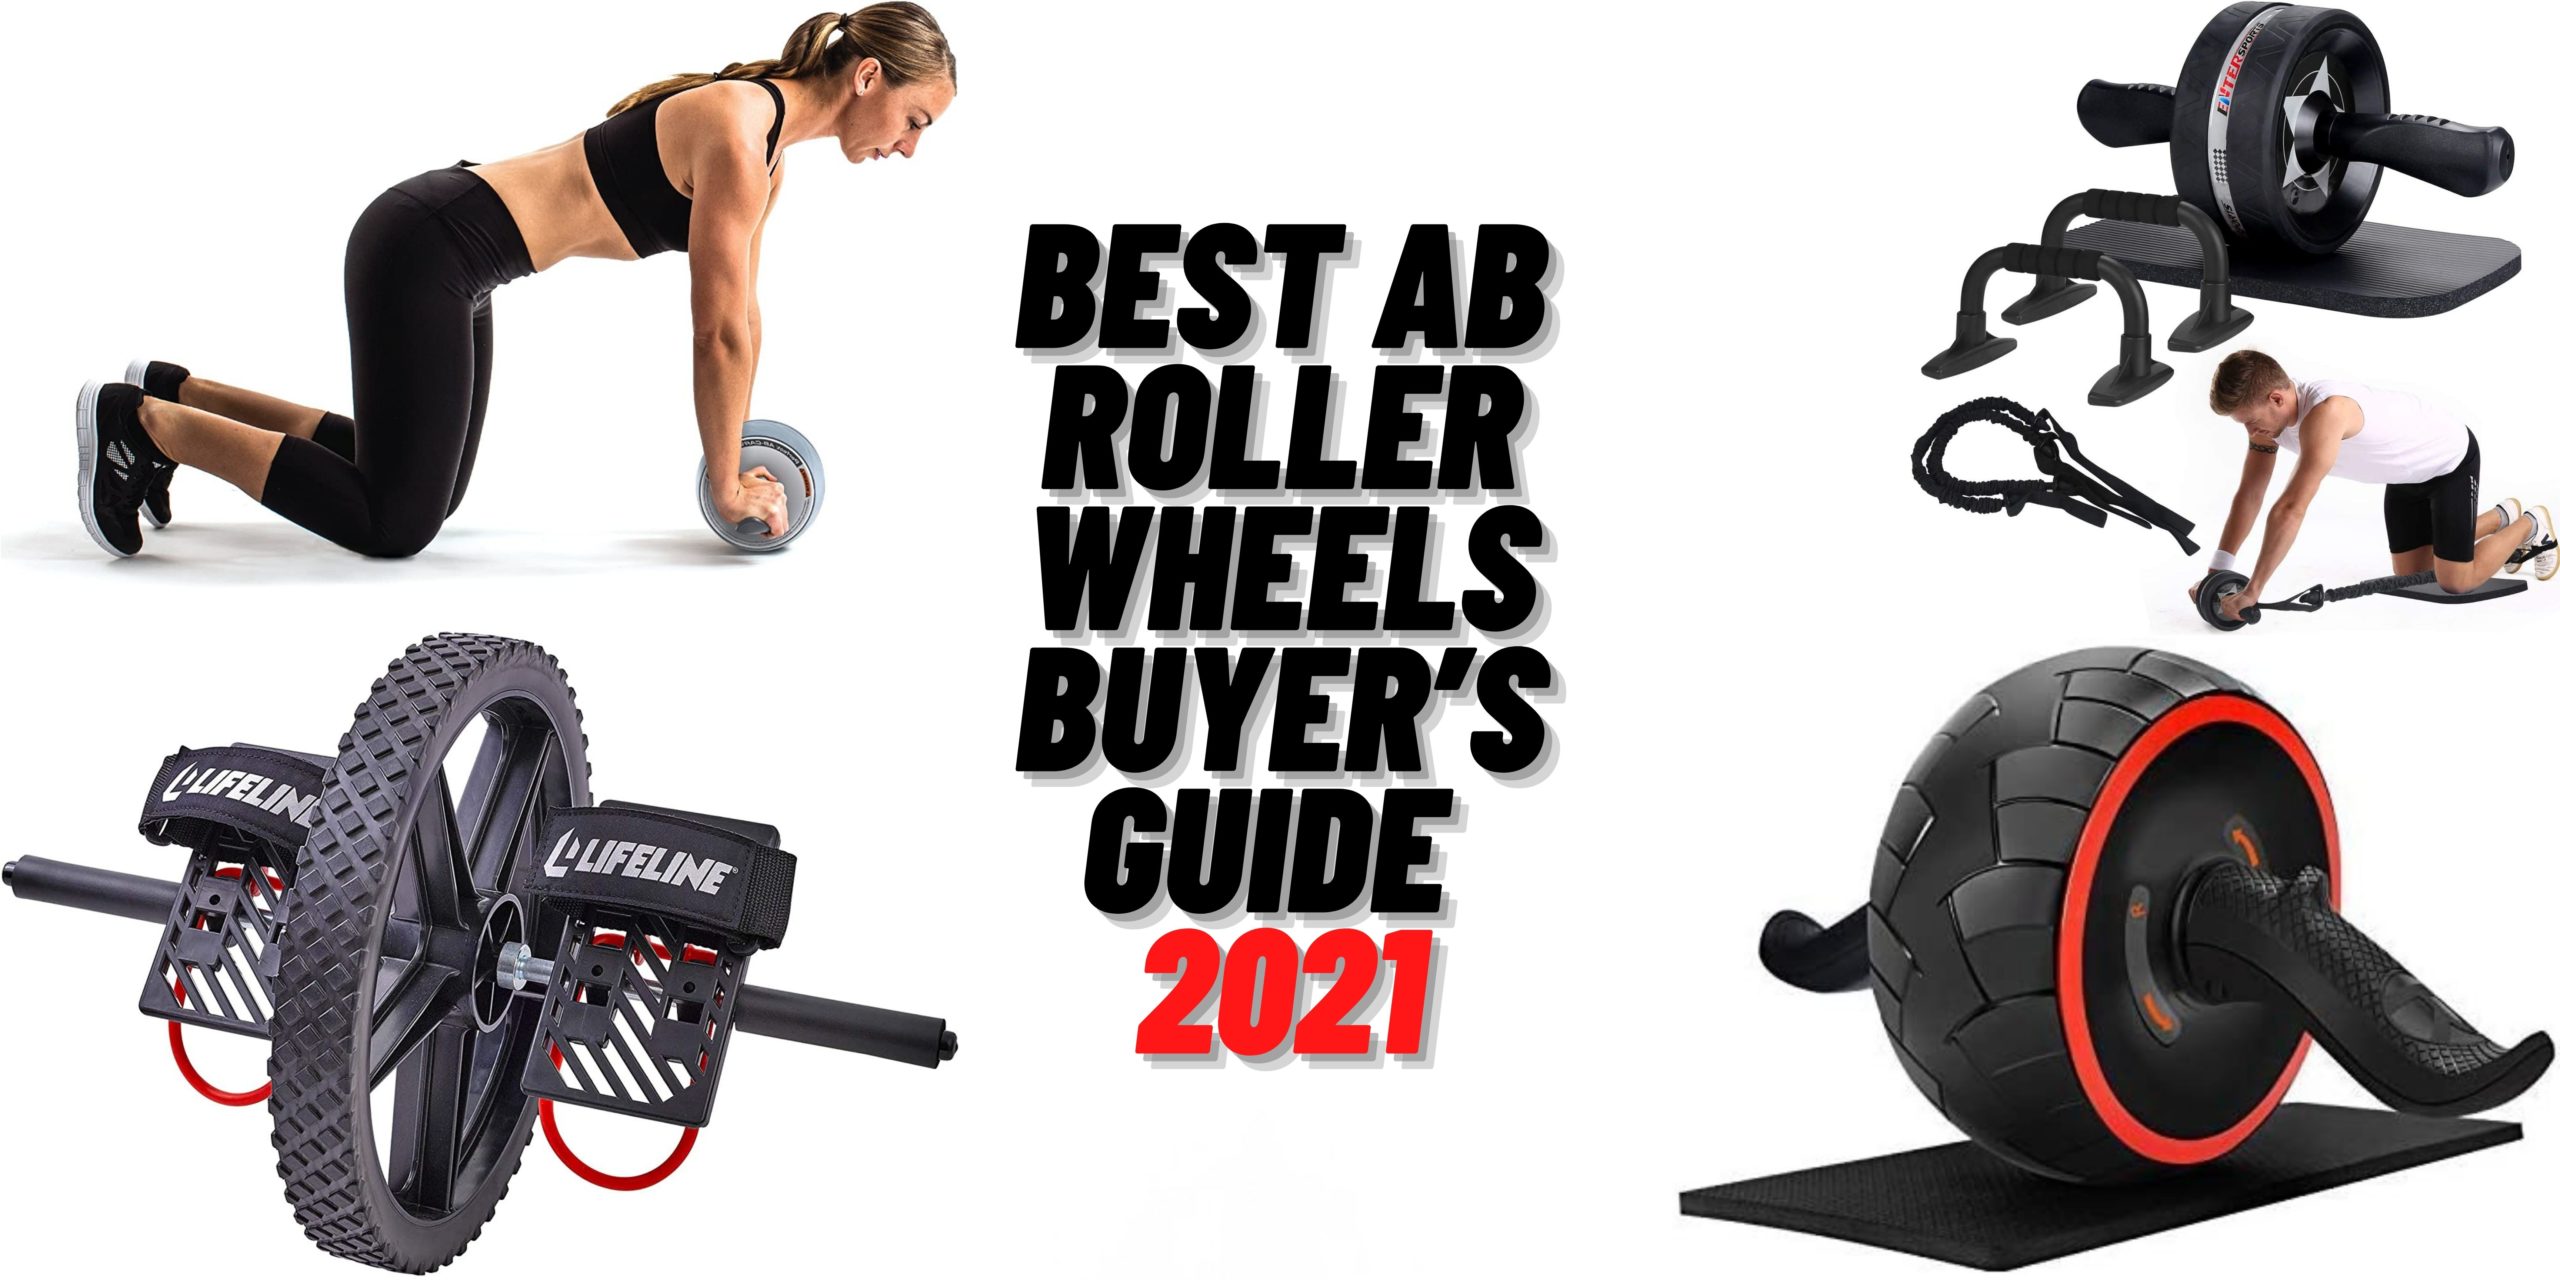 Best Ab Roller Wheels Buyers guide 2021 scaled